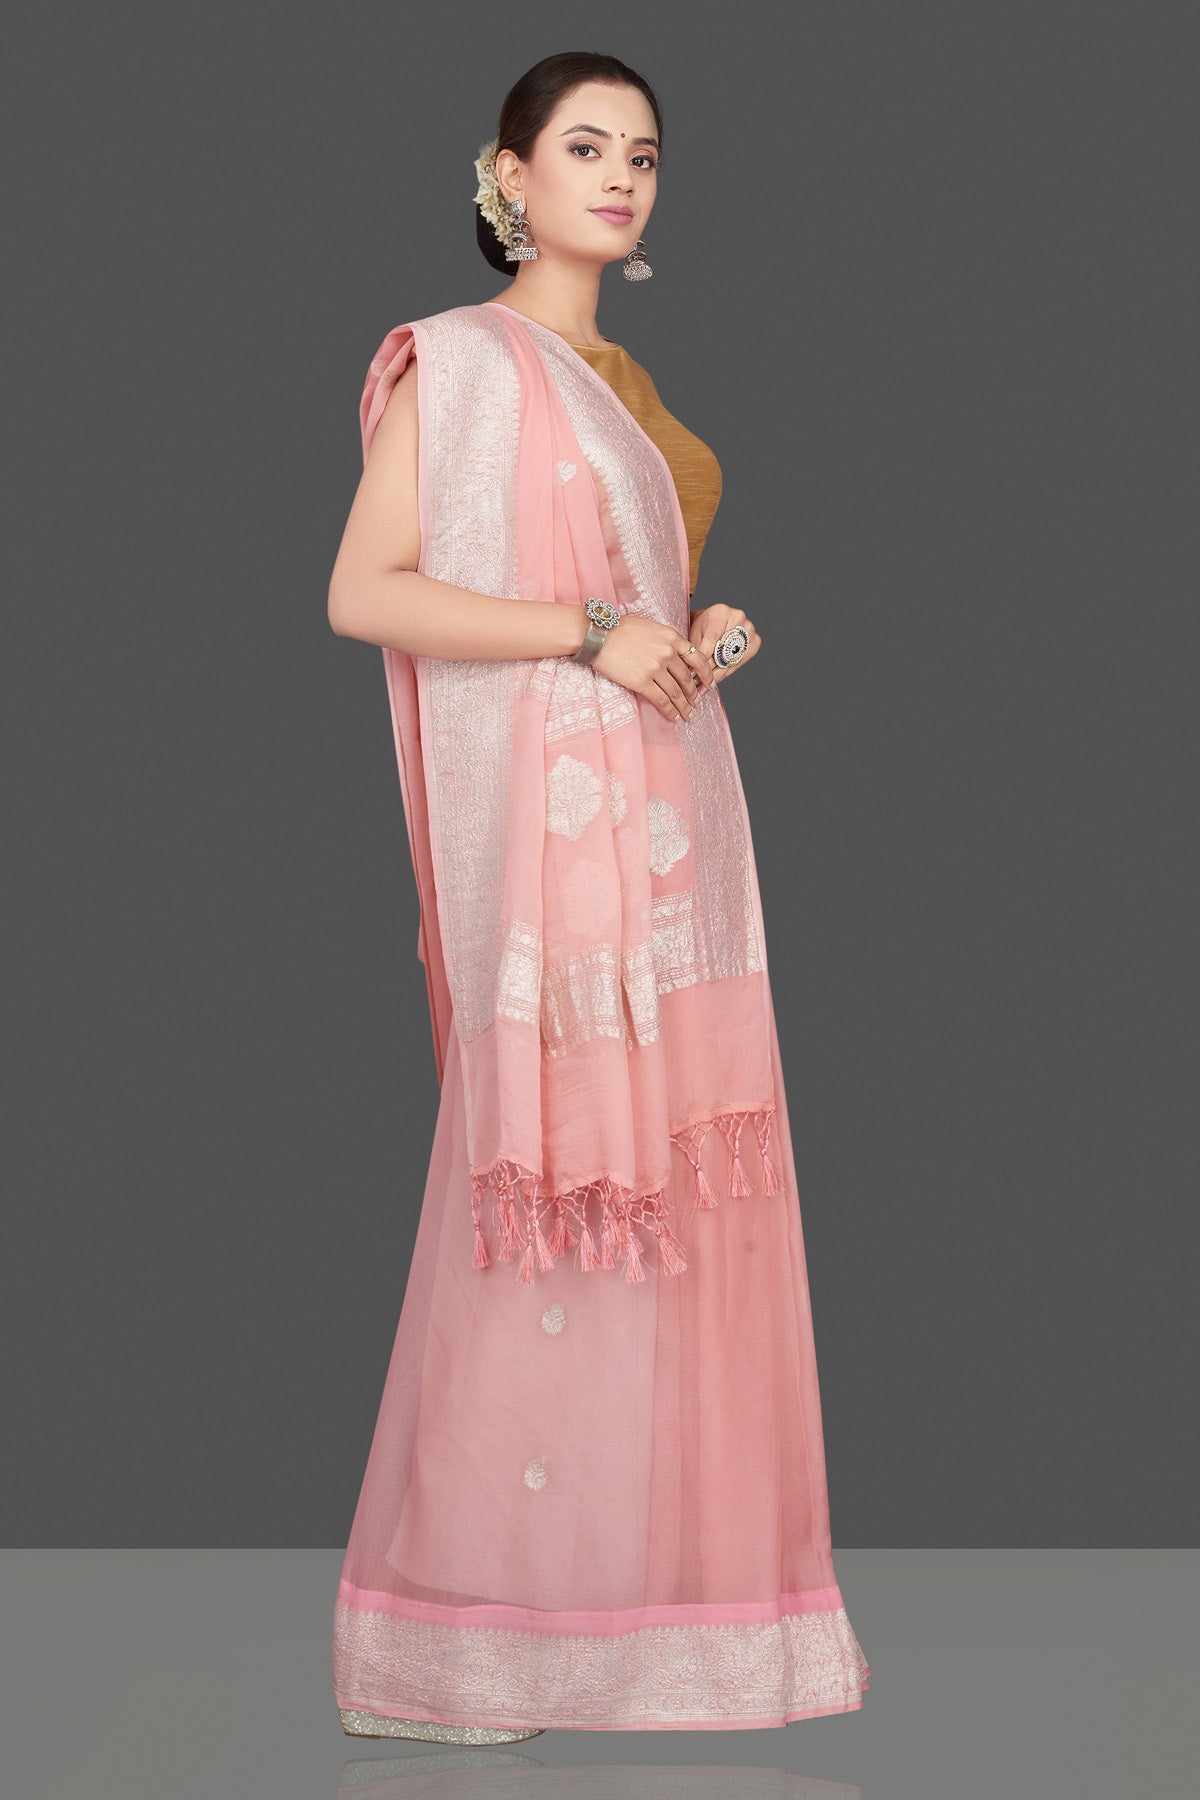 Shop gorgeous light pink chiffon georgette sari online in USA with silver zari border. Go for stunning Indian designer sarees, georgette sarees, handwoven saris, embroidered sarees for festive occasions and weddings from Pure Elegance Indian clothing store in USA.-side